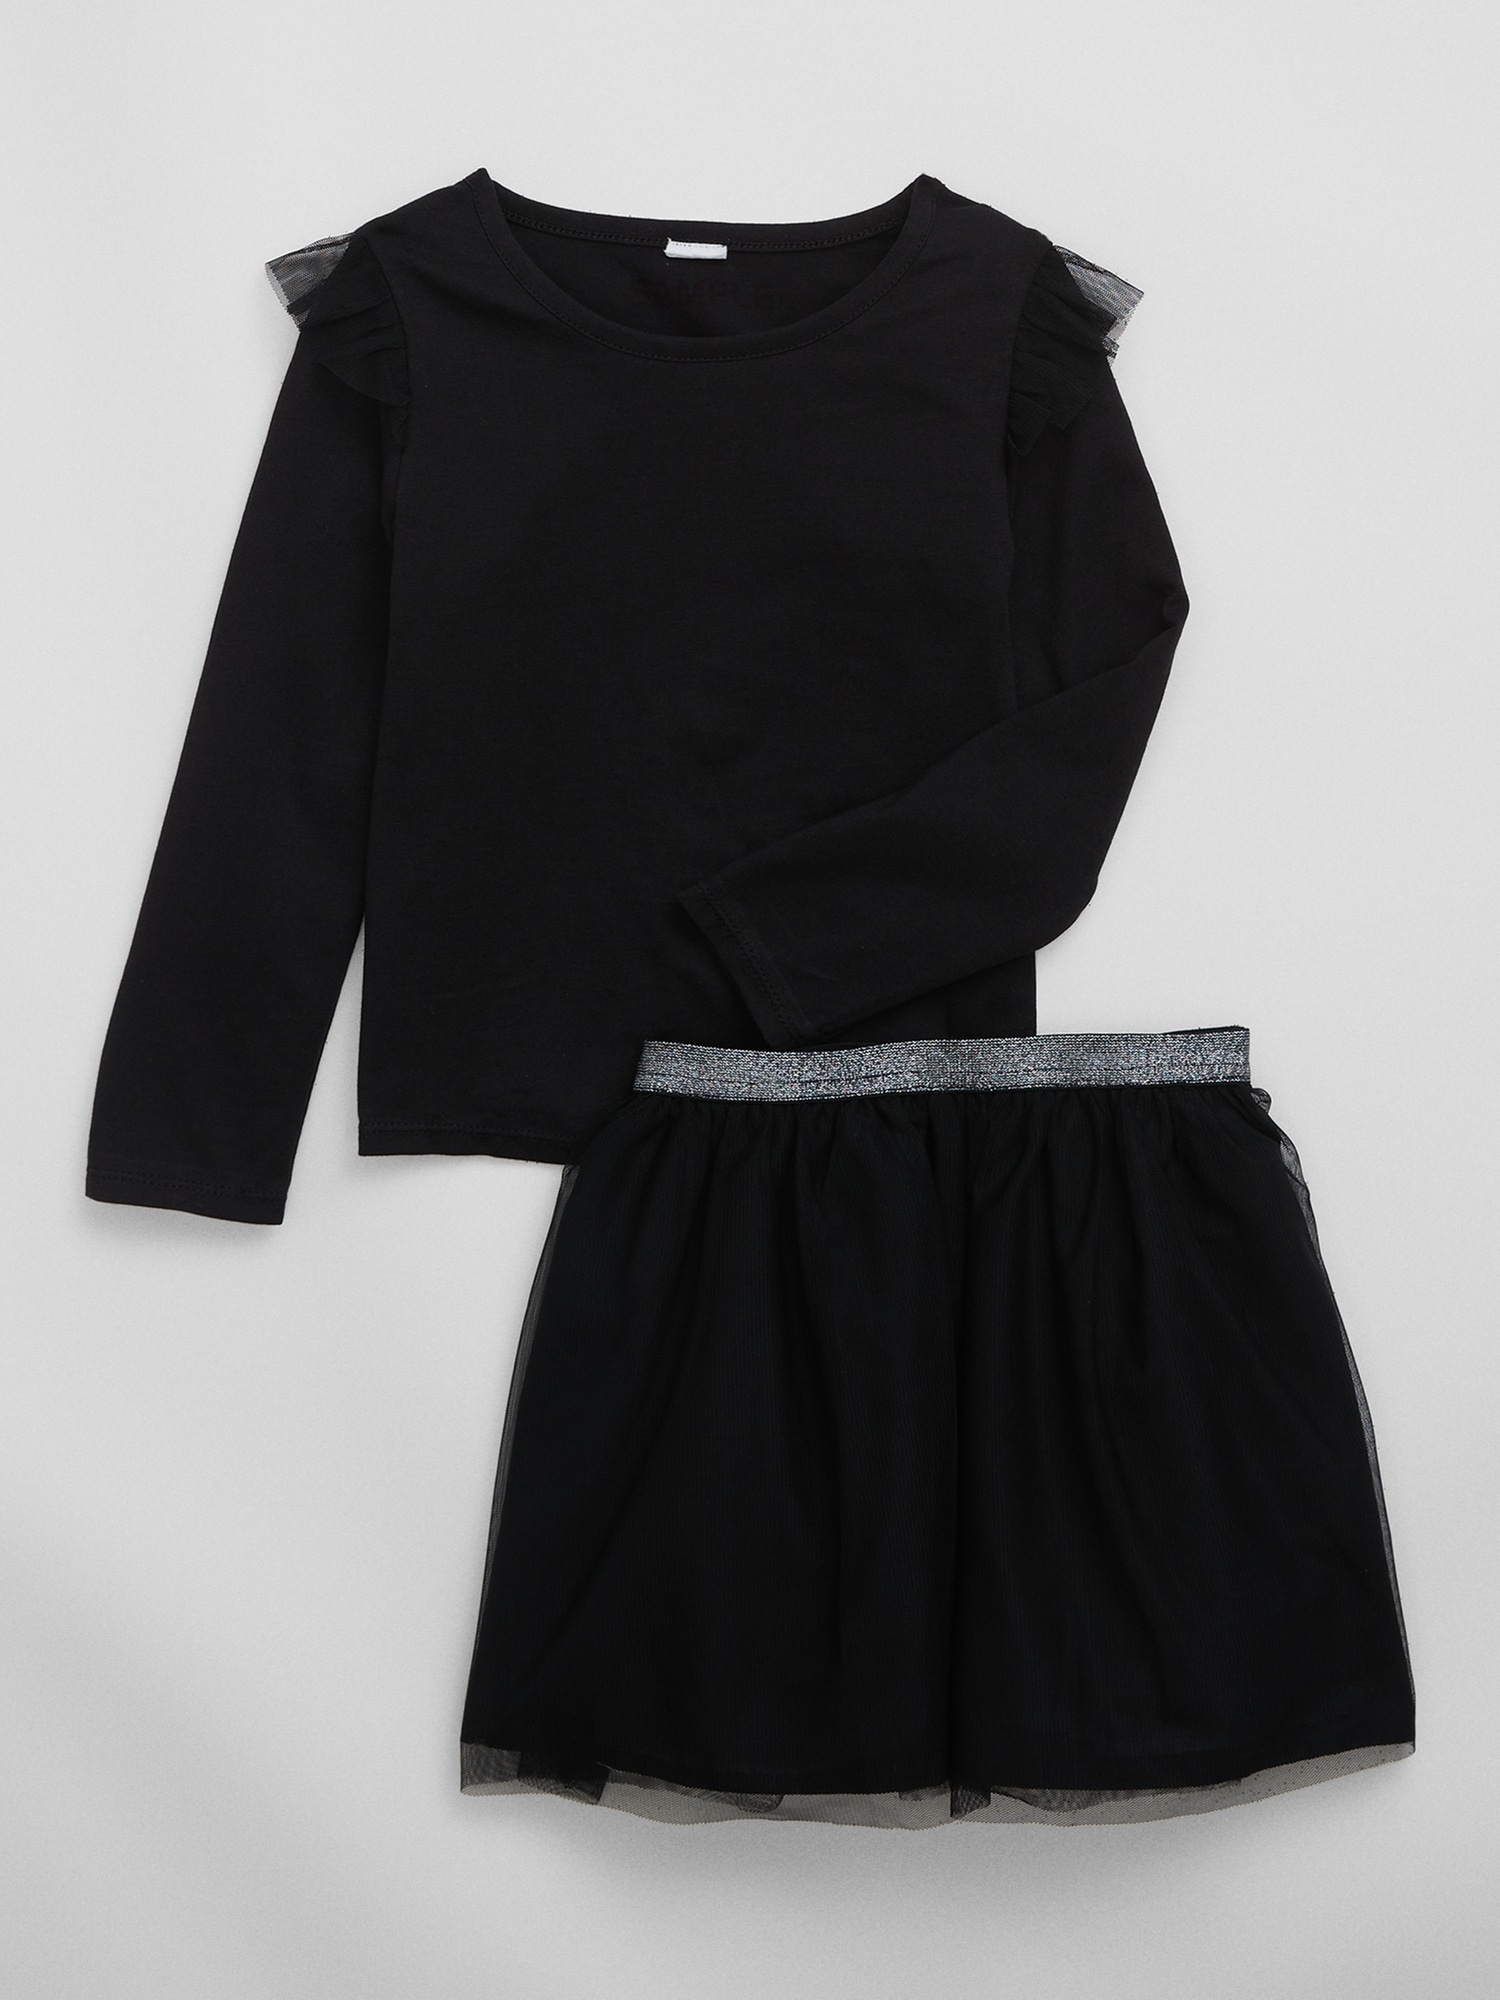 babyGap Tulle Two-Piece Outfit Set | Gap Factory